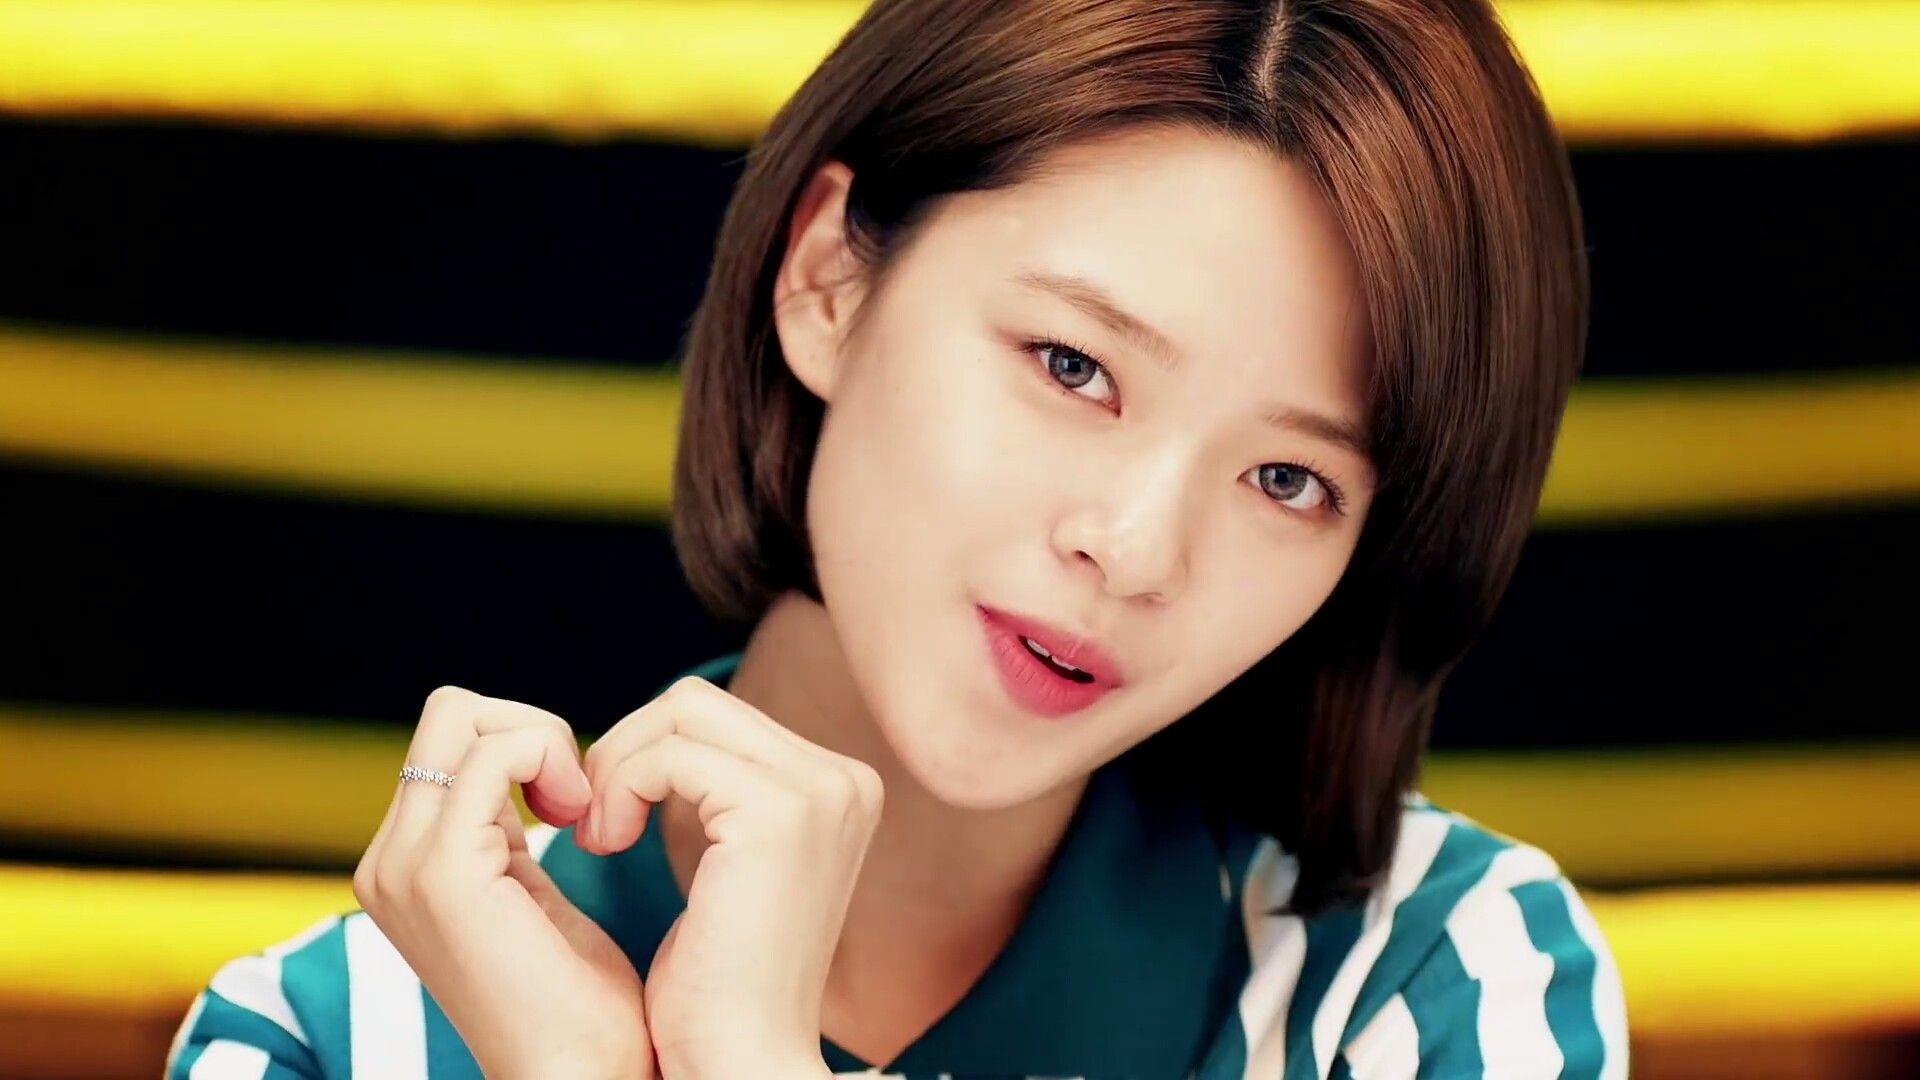 Future possibilities for Jeongyeon, Post-TWICE career, Acting or solo journey, AllKpop forum discussions, 1920x1080 Full HD Desktop